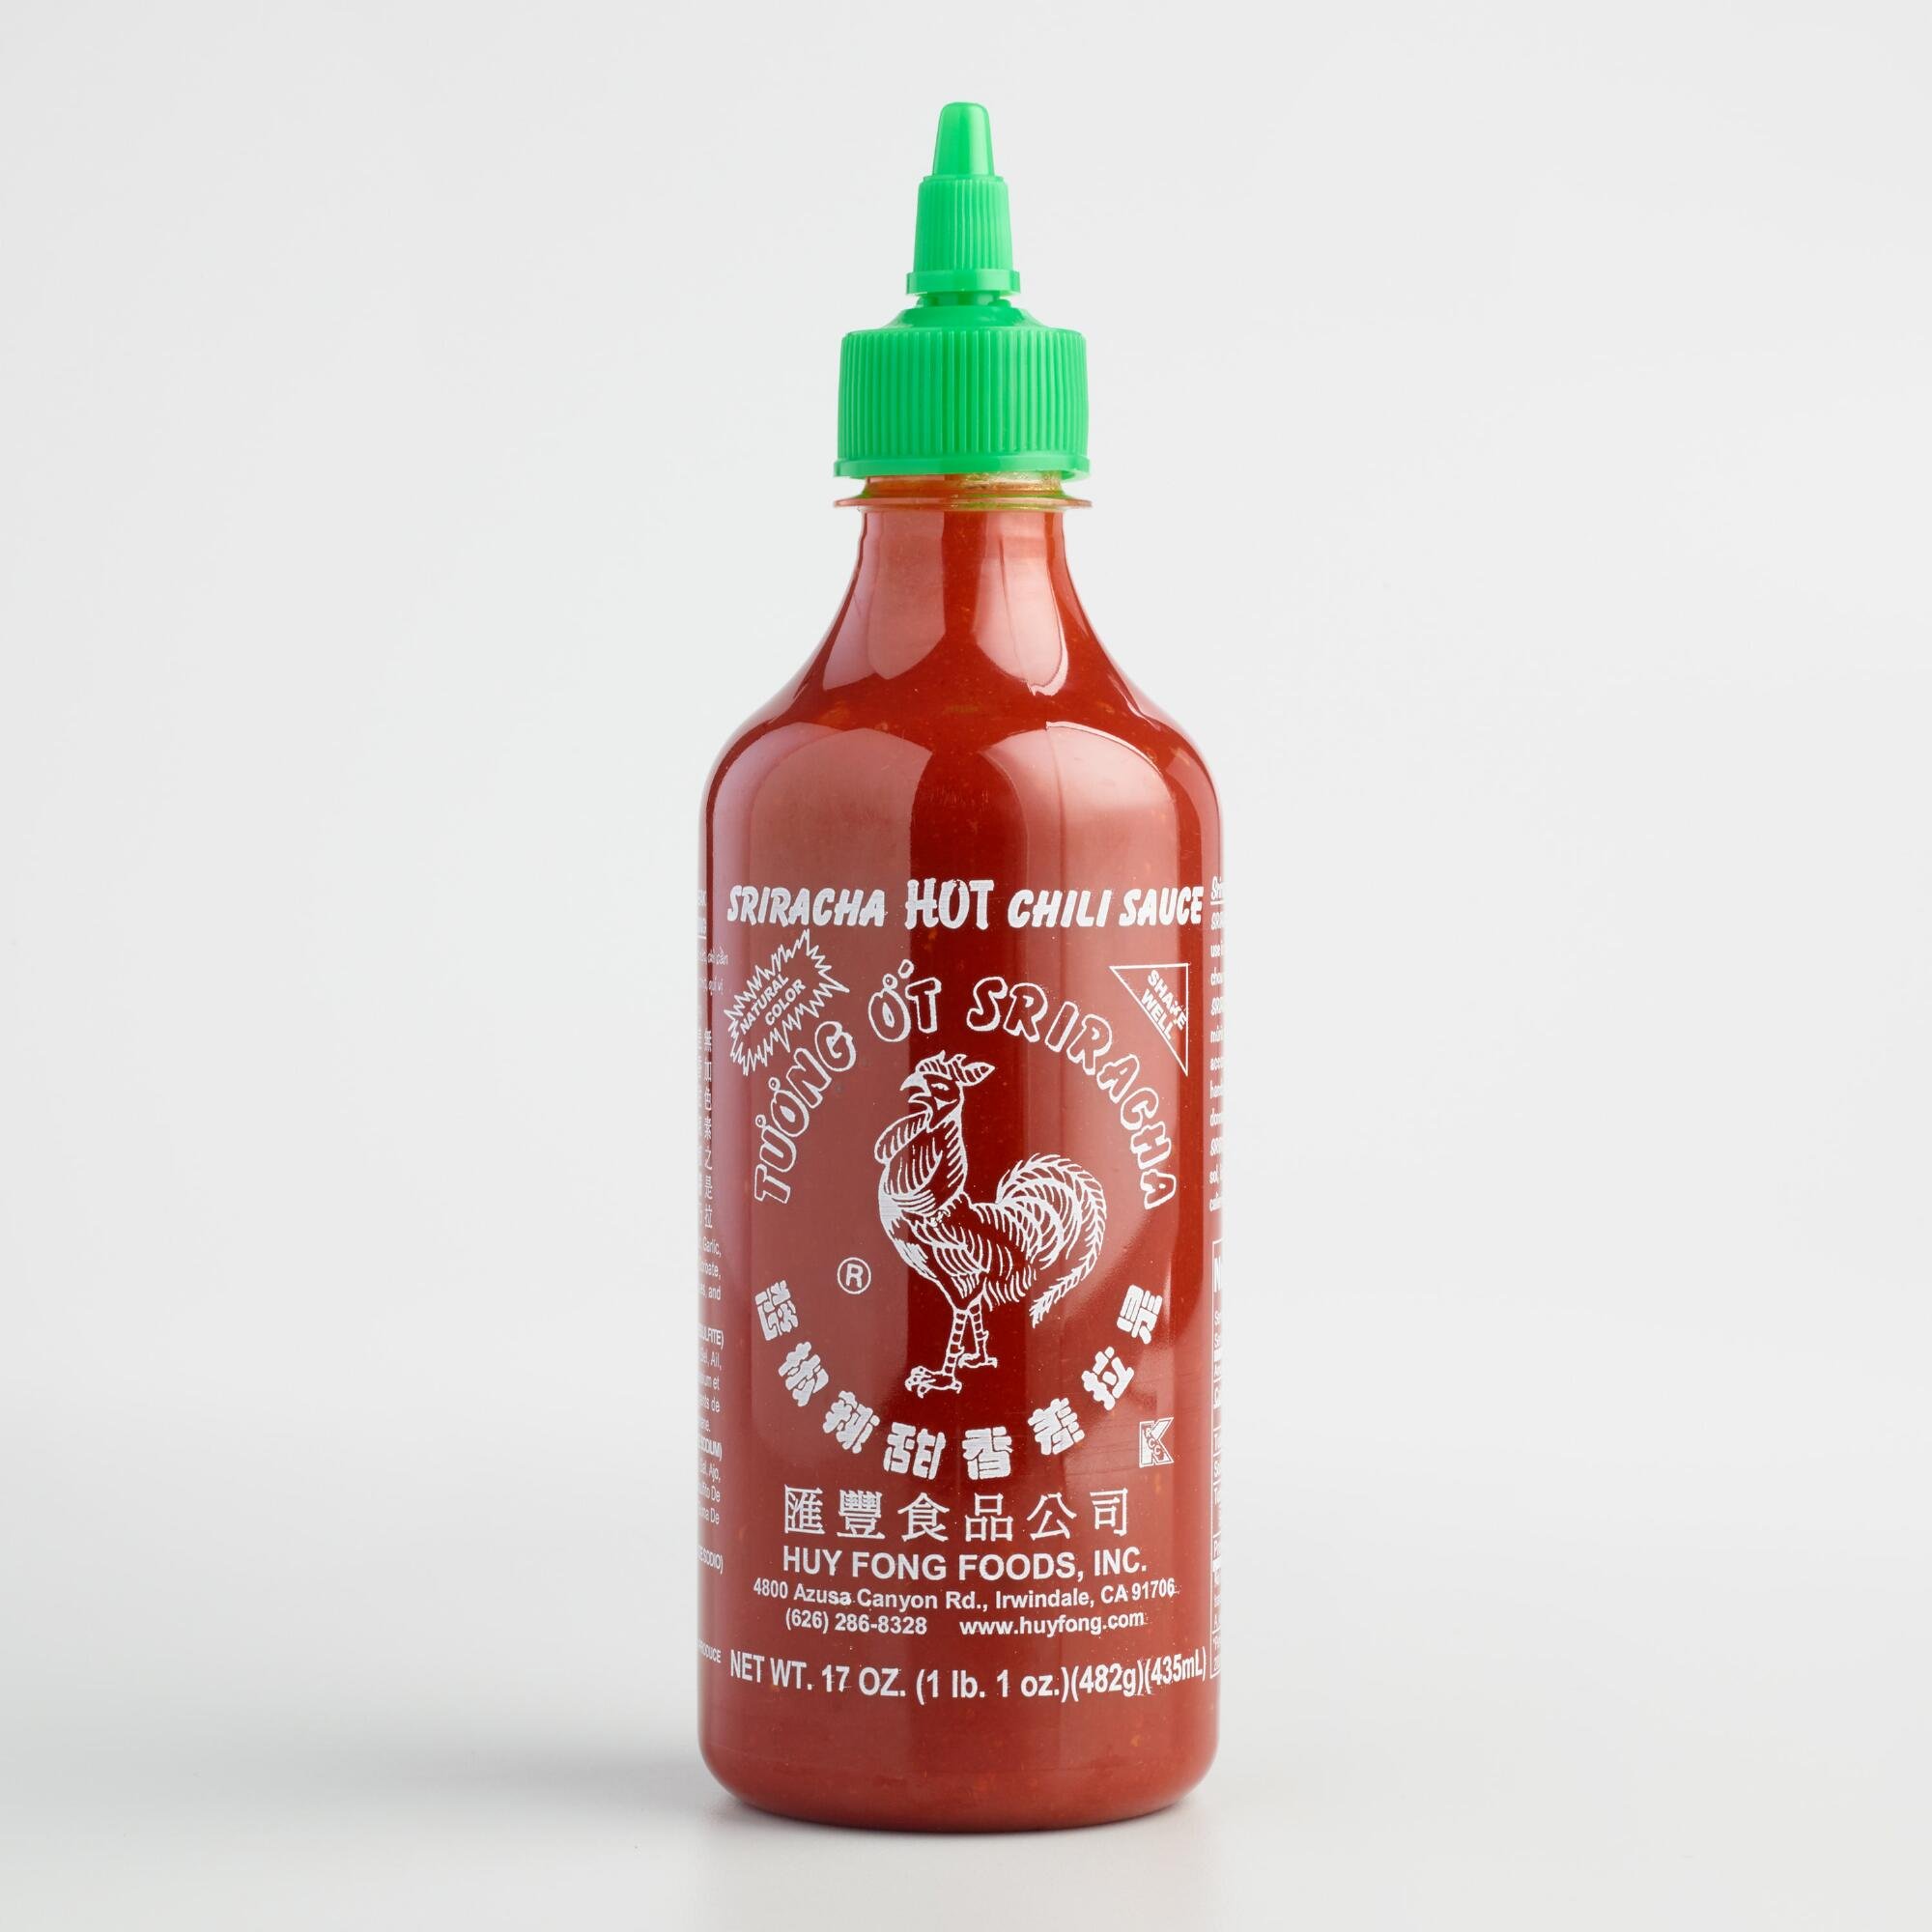 whats your favorite hot sauce?